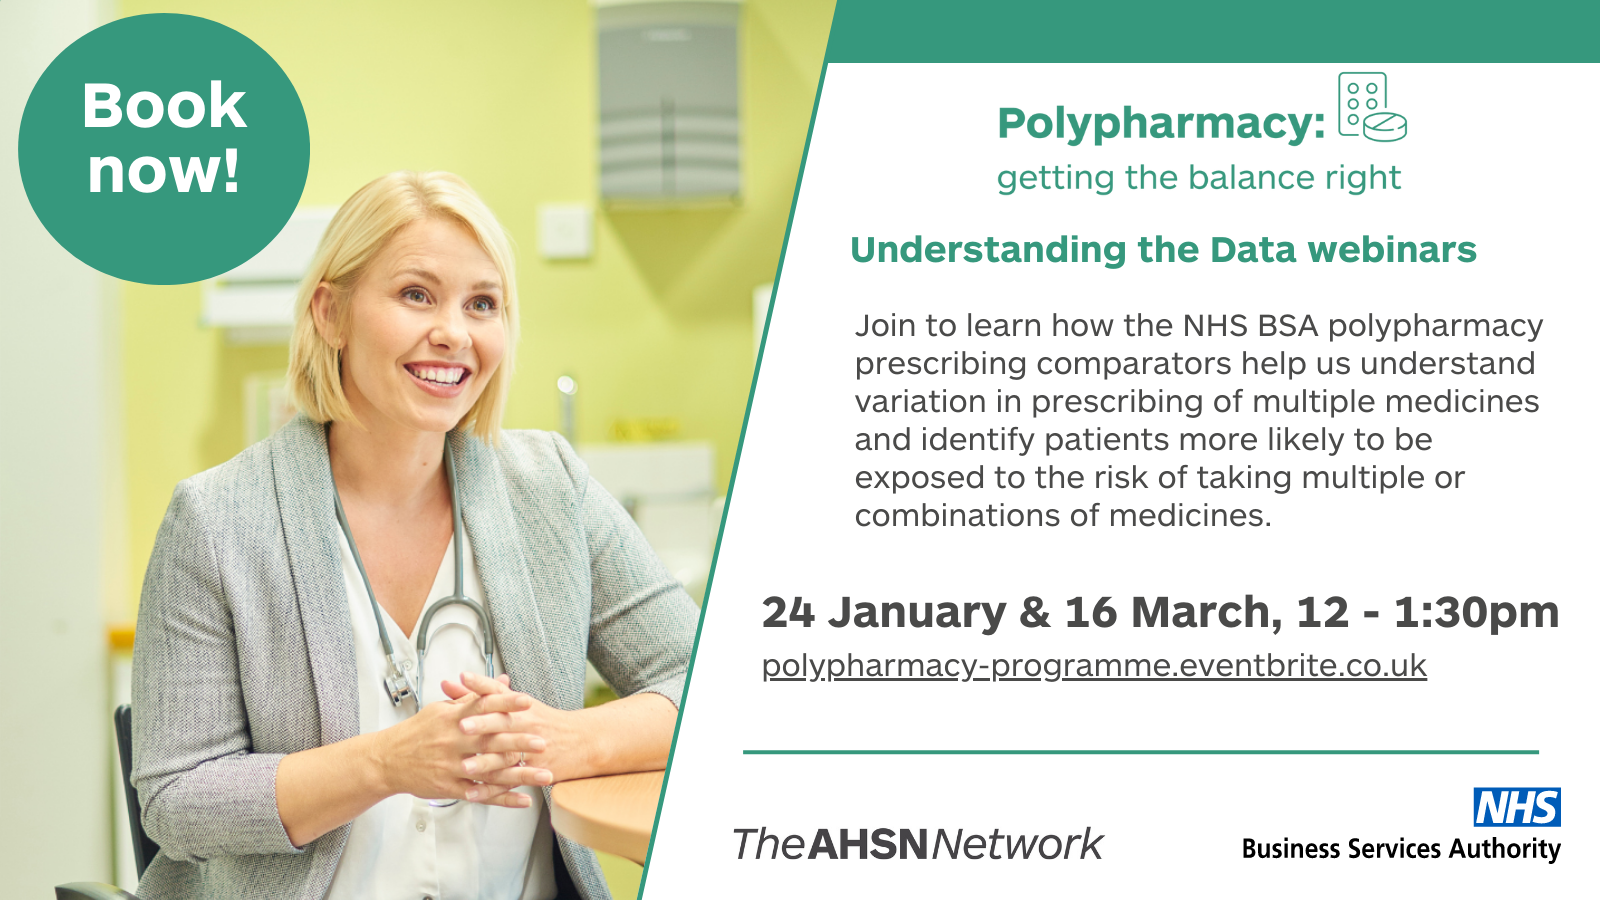 Polypharmacy Programme: Getting the balance right. 24 January & 16 March, 12-1:30pm. Book now!